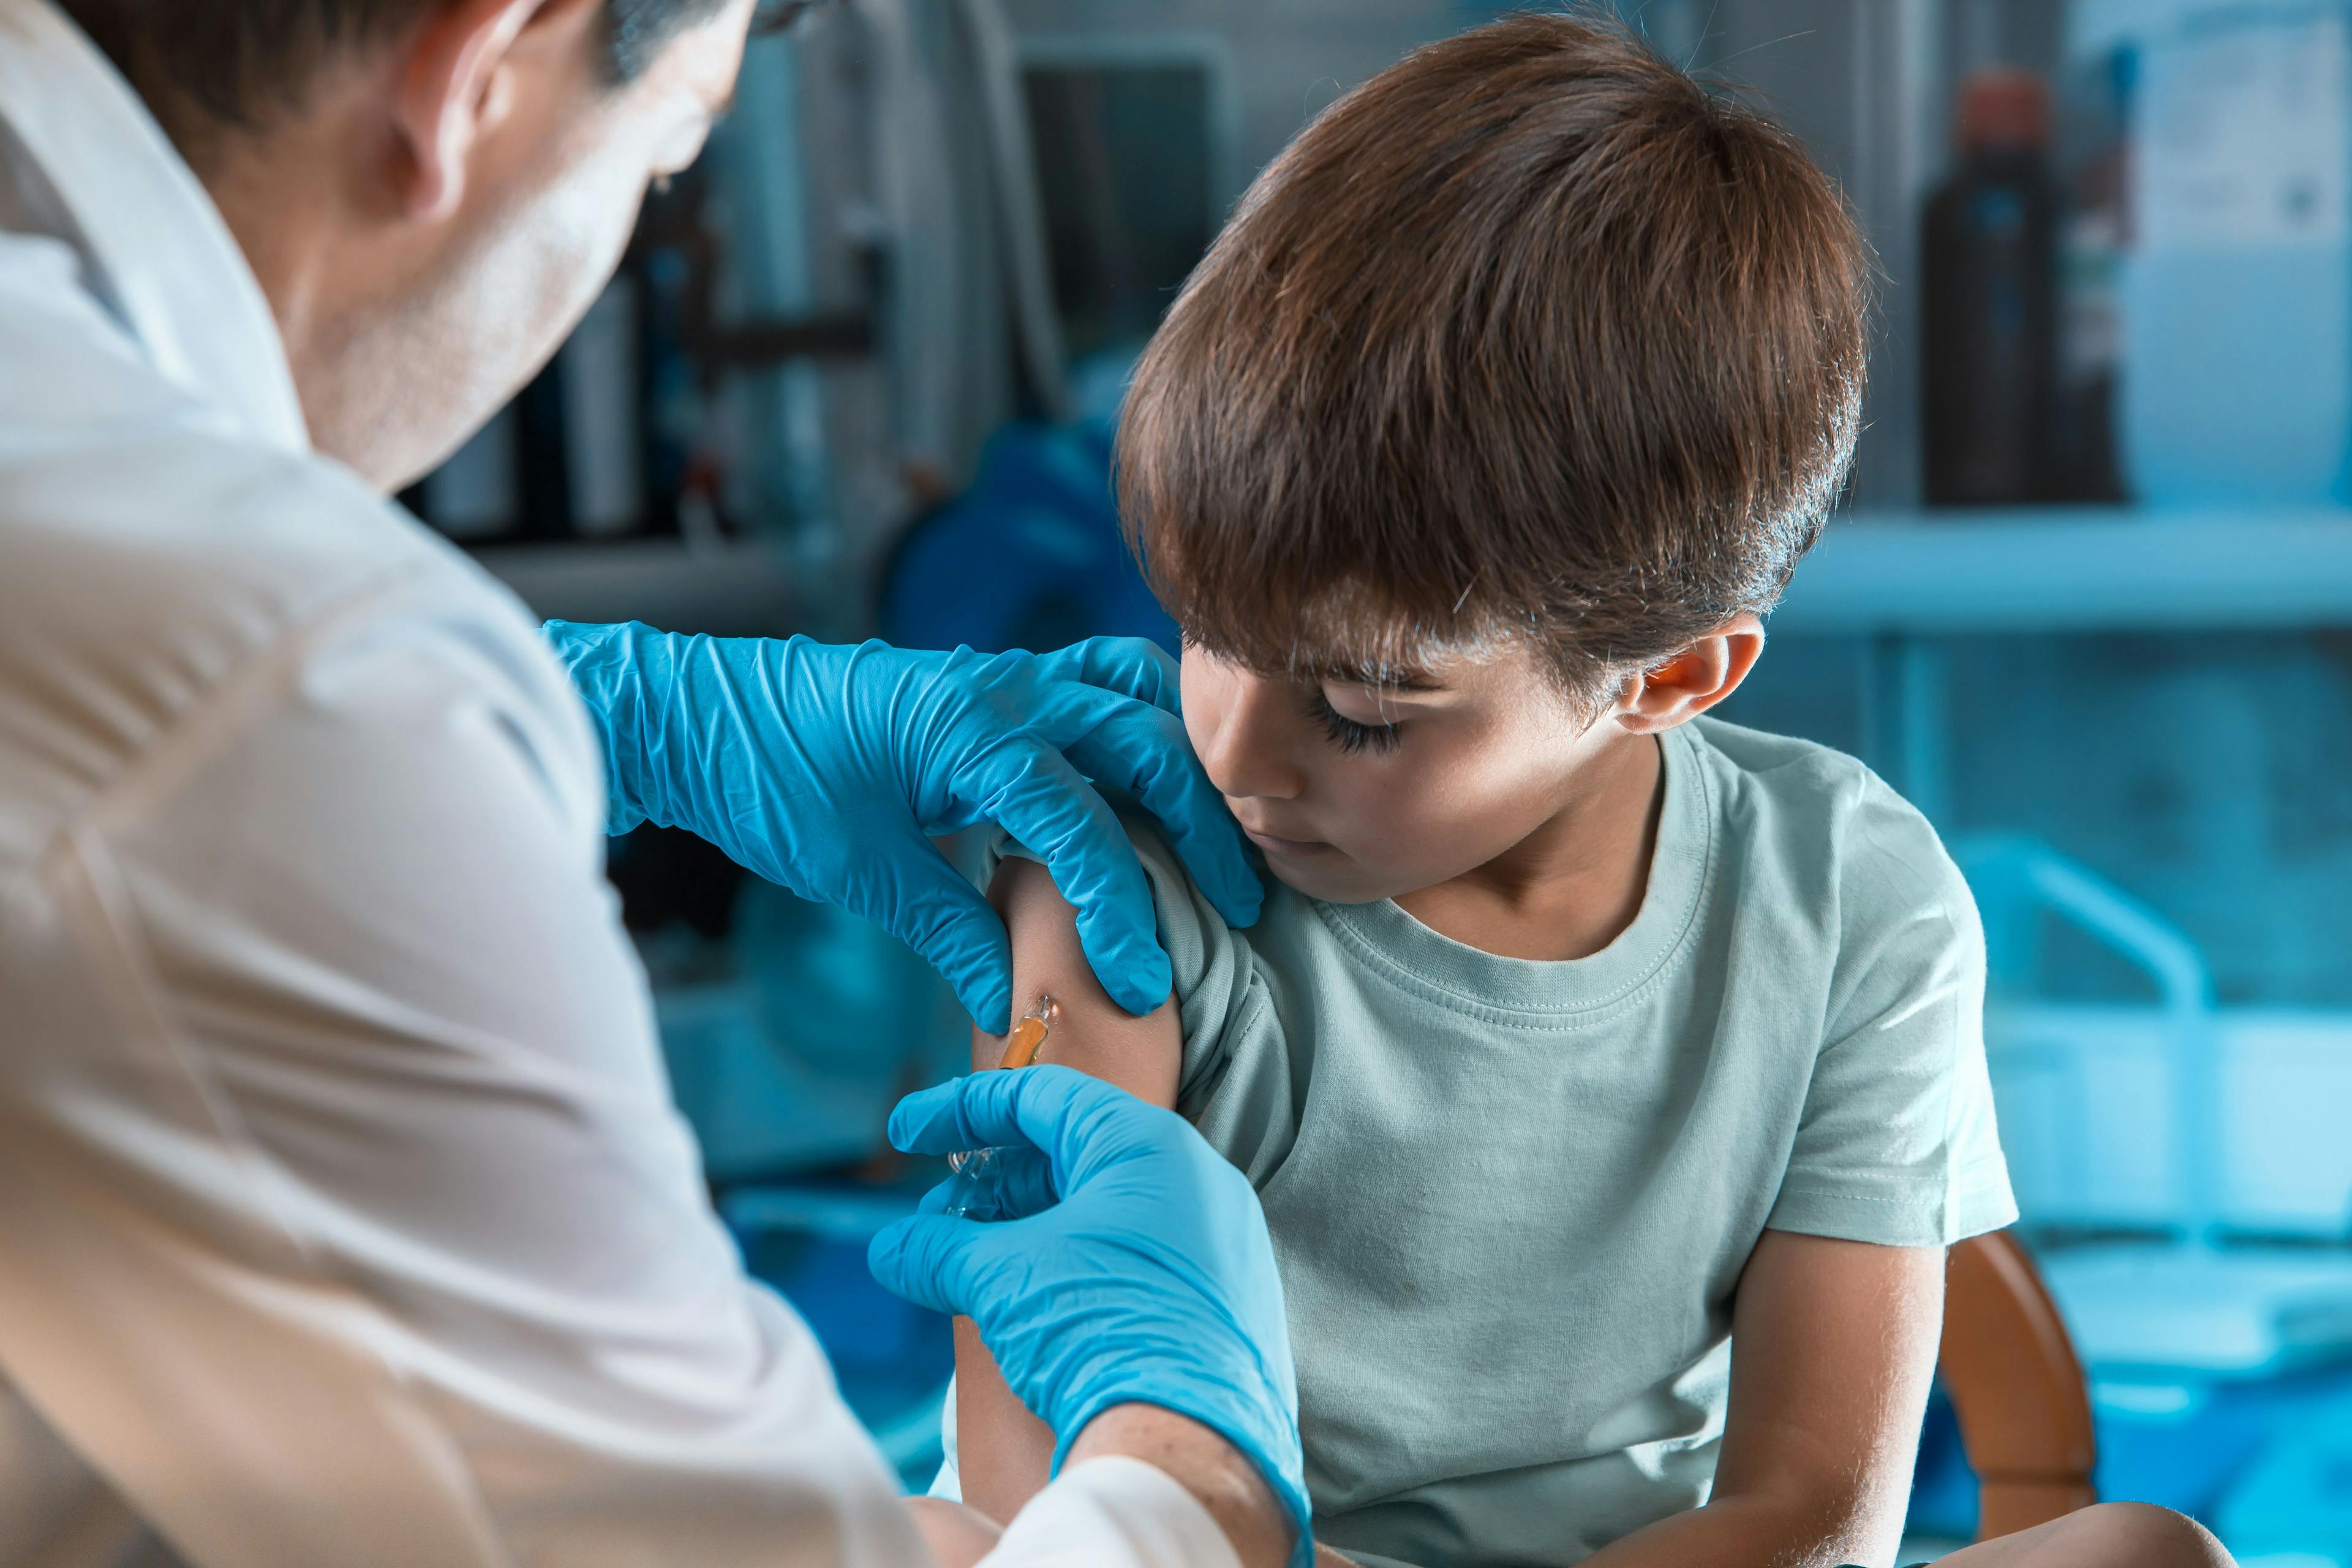 Hospitals Begin Giving COVID-19 Vaccines to Younger Kids, but the Effort Has its Challenges